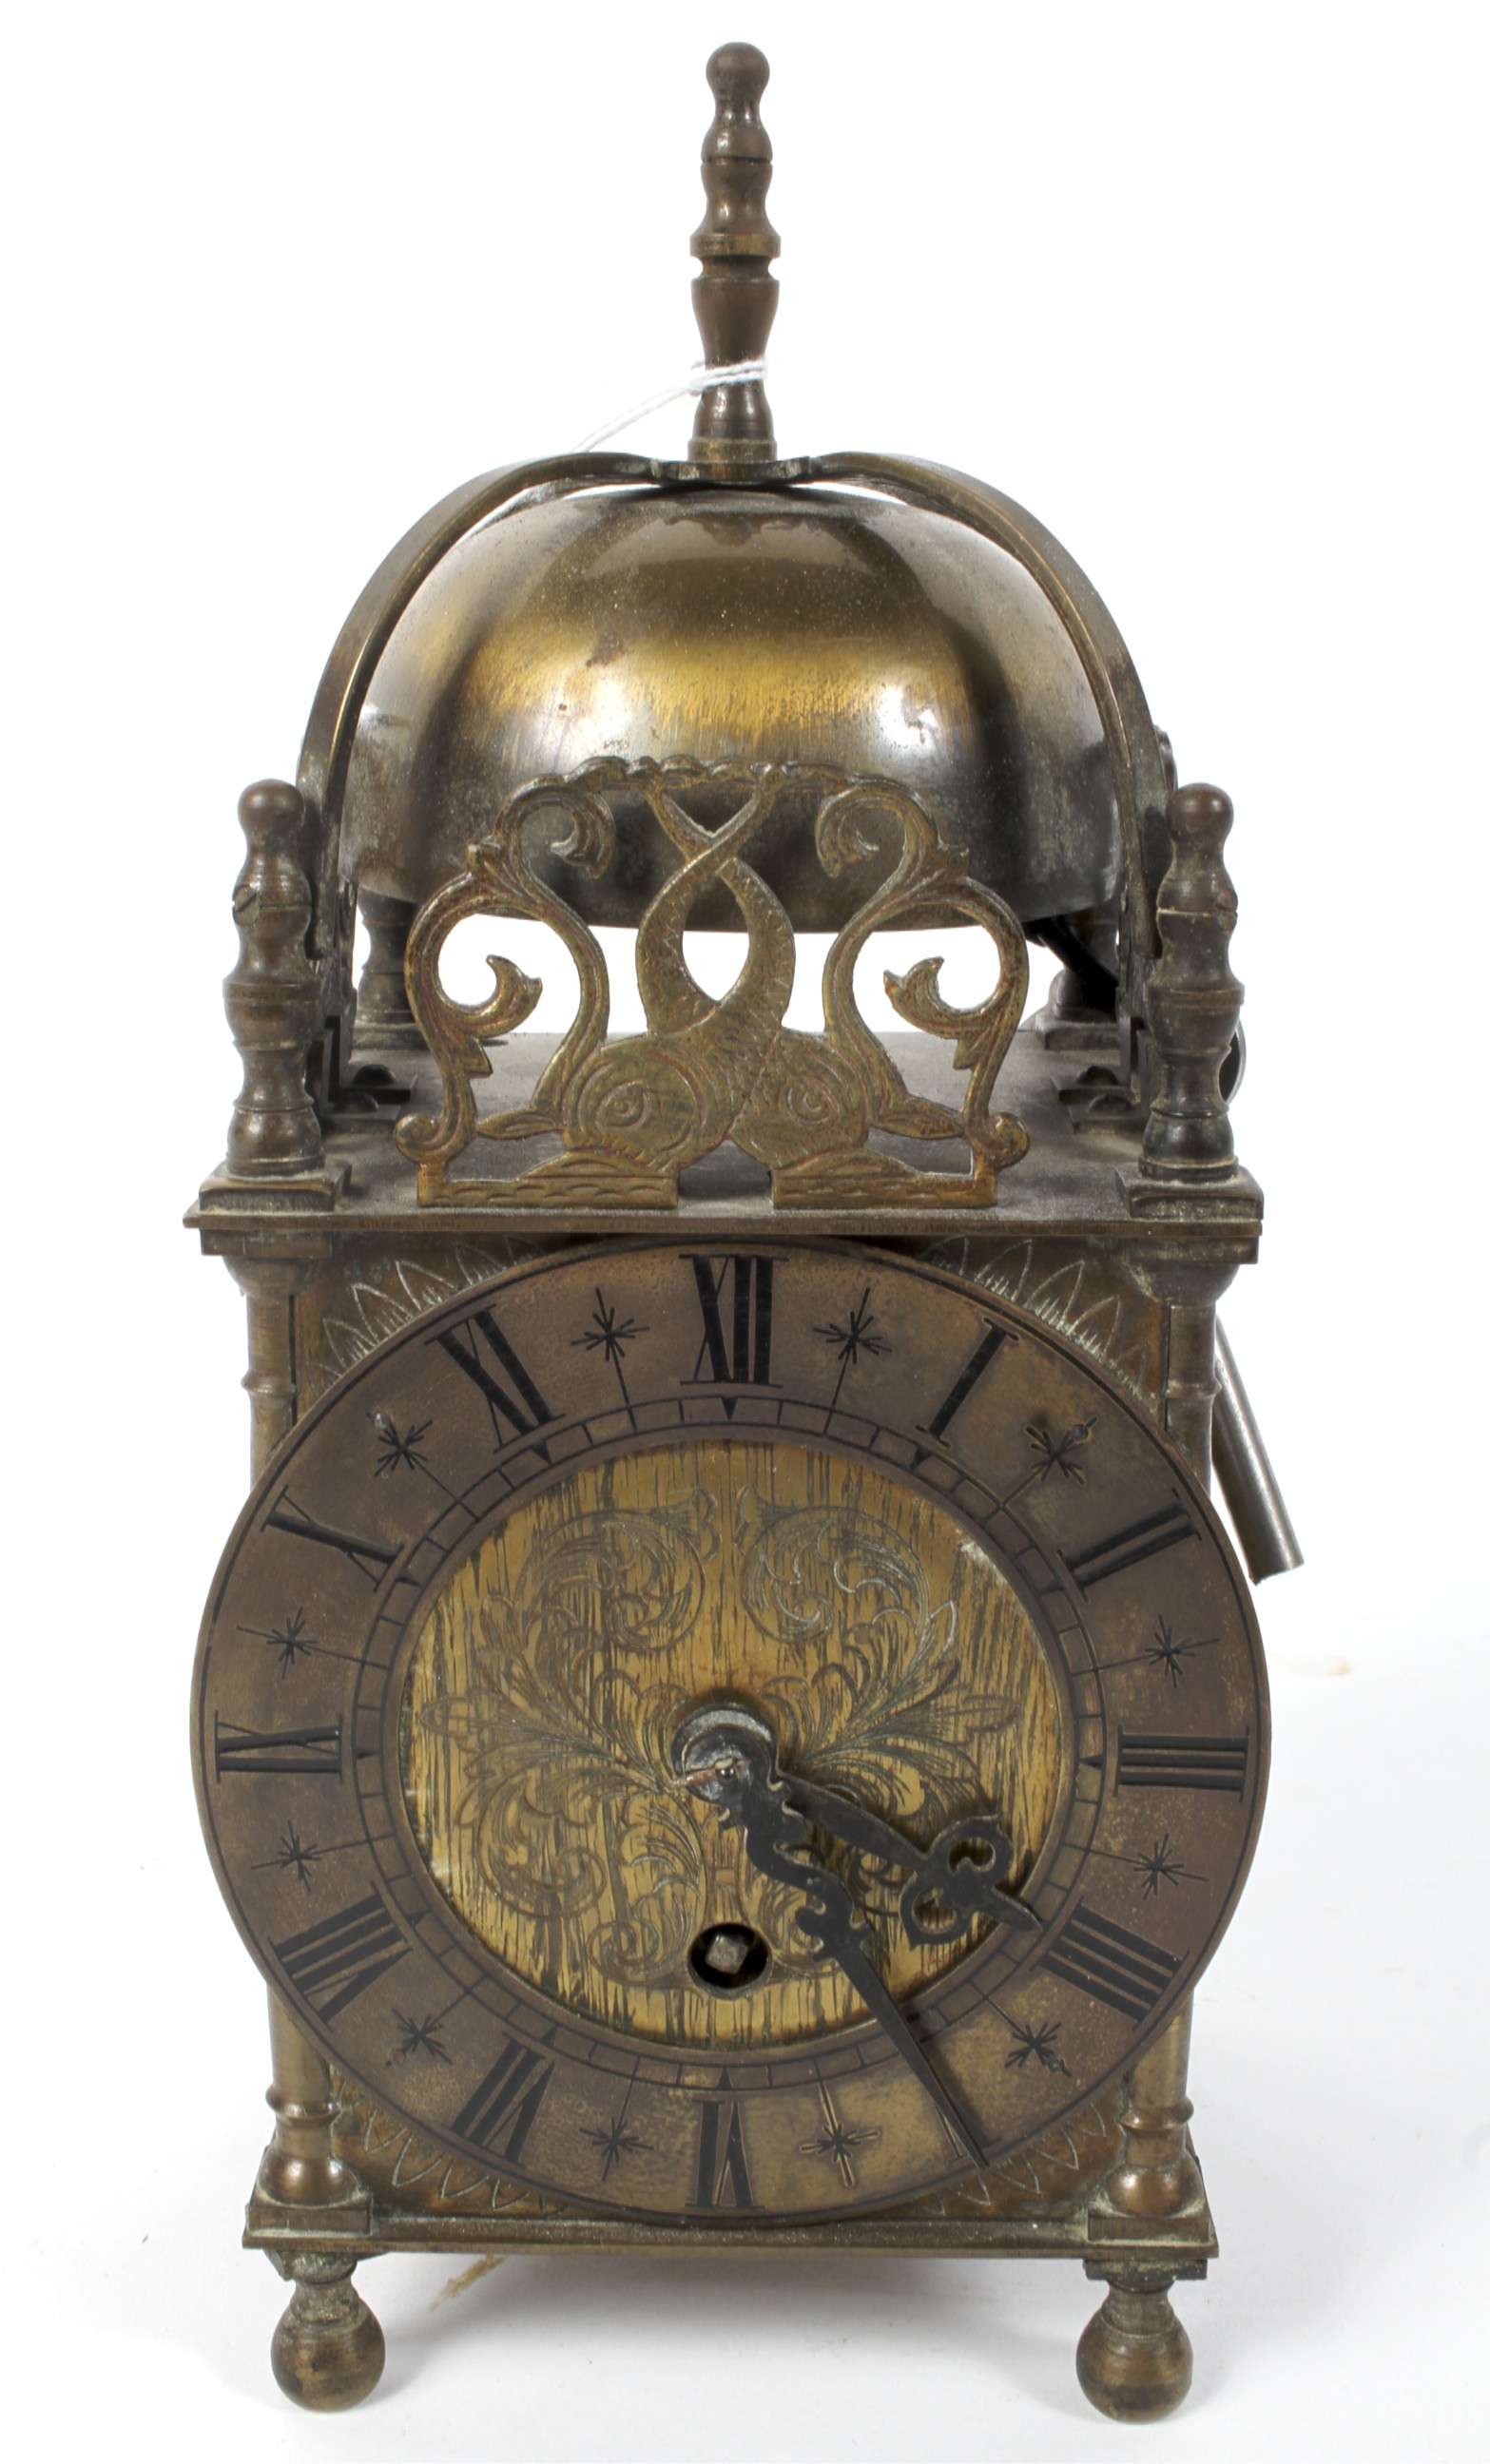 A brass lantern clock, early 20th century, the mechanism marked Empire, with key, 23.